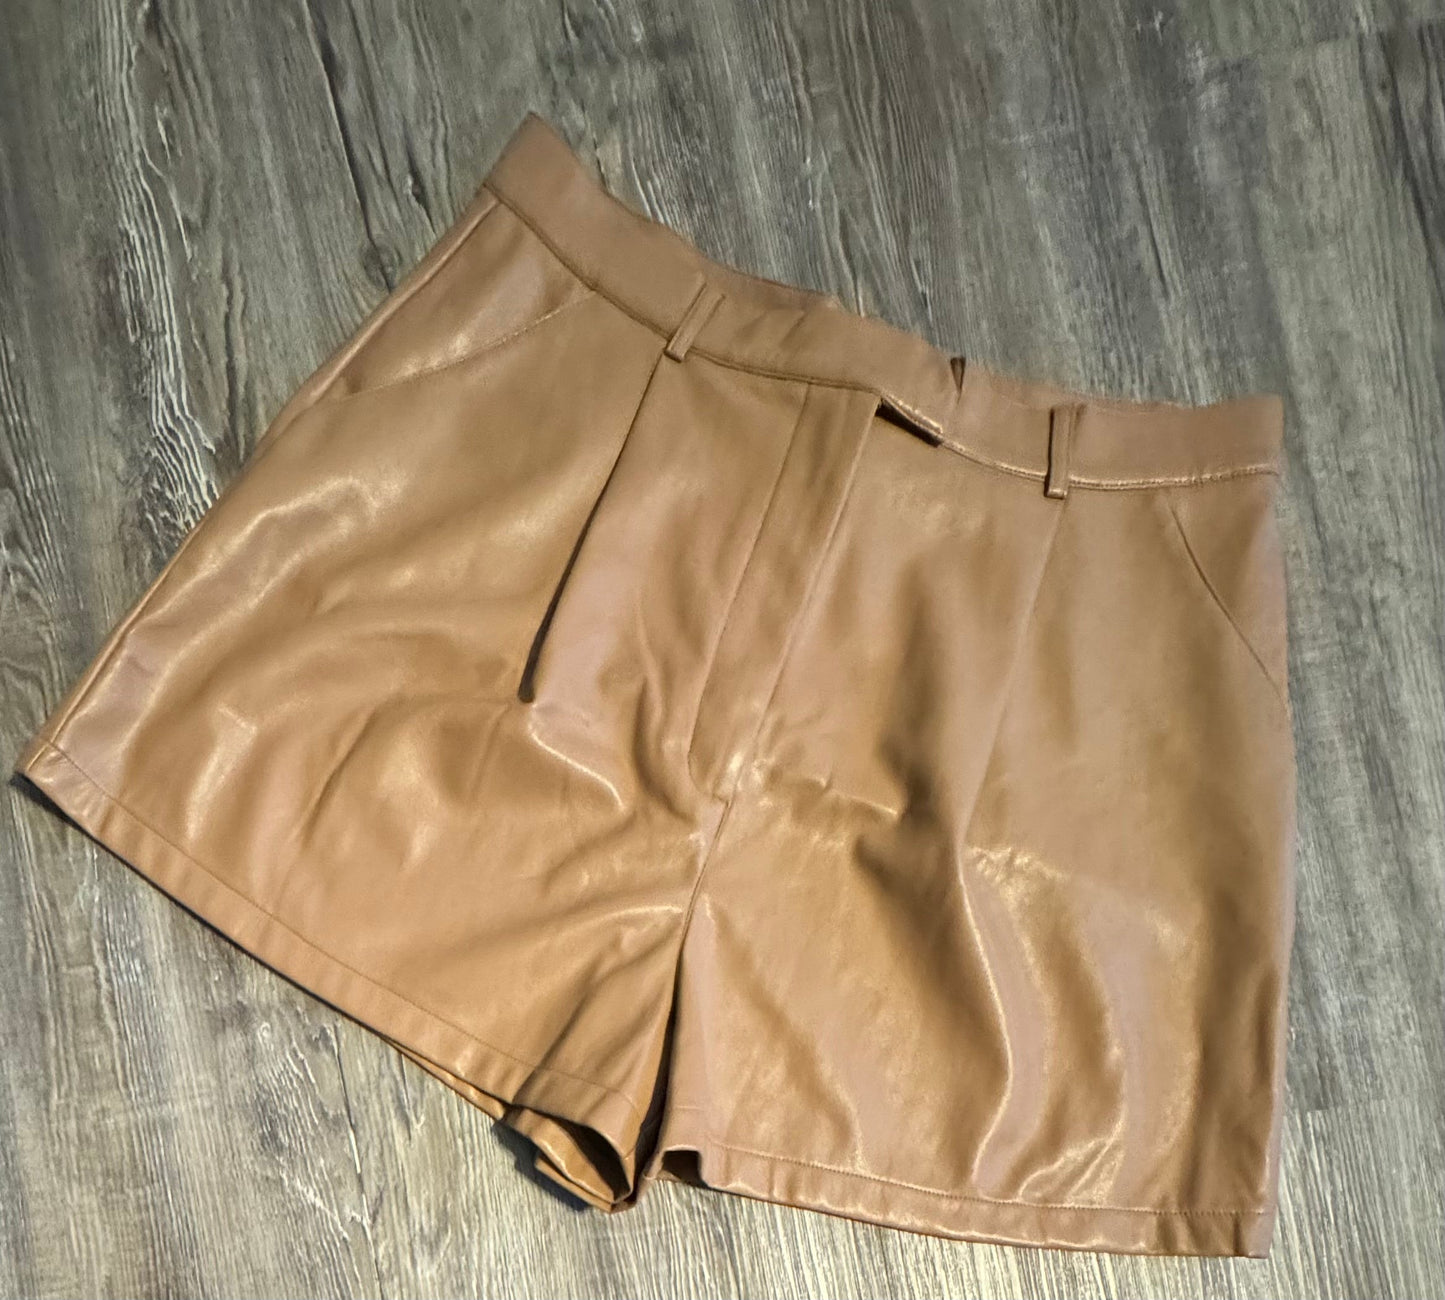 Shorts By Nasty Gal  Size: 12